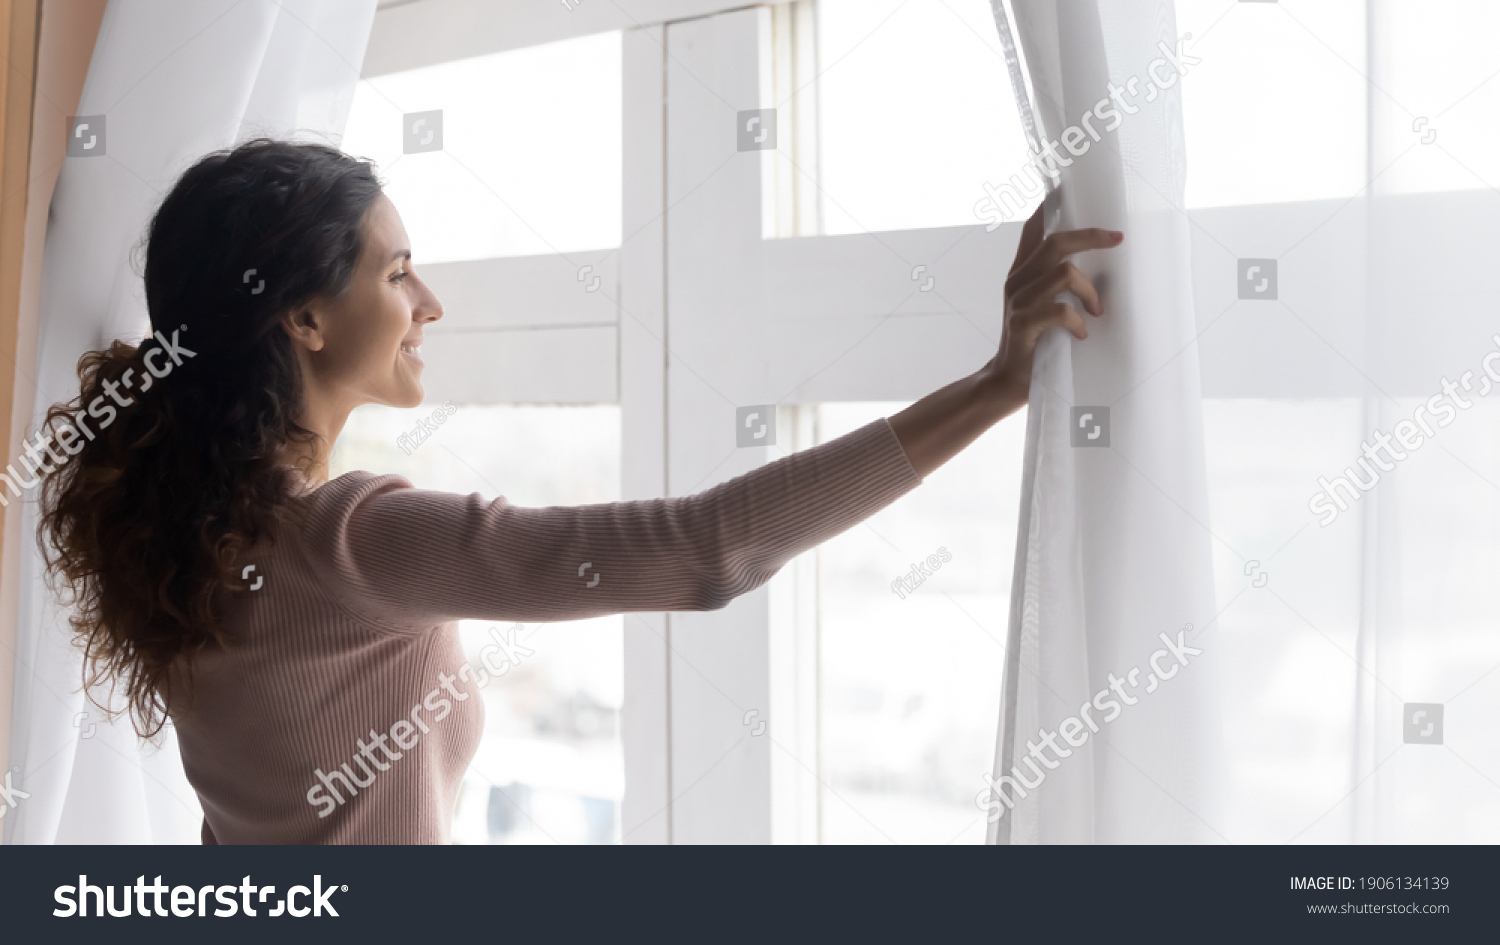 Smiling young dreamy woman opening curtains, looking outside window in morning. Sincere millennial caucasian lady breathing fresh air, starting new day or enjoying peaceful weekend alone at home. #1906134139